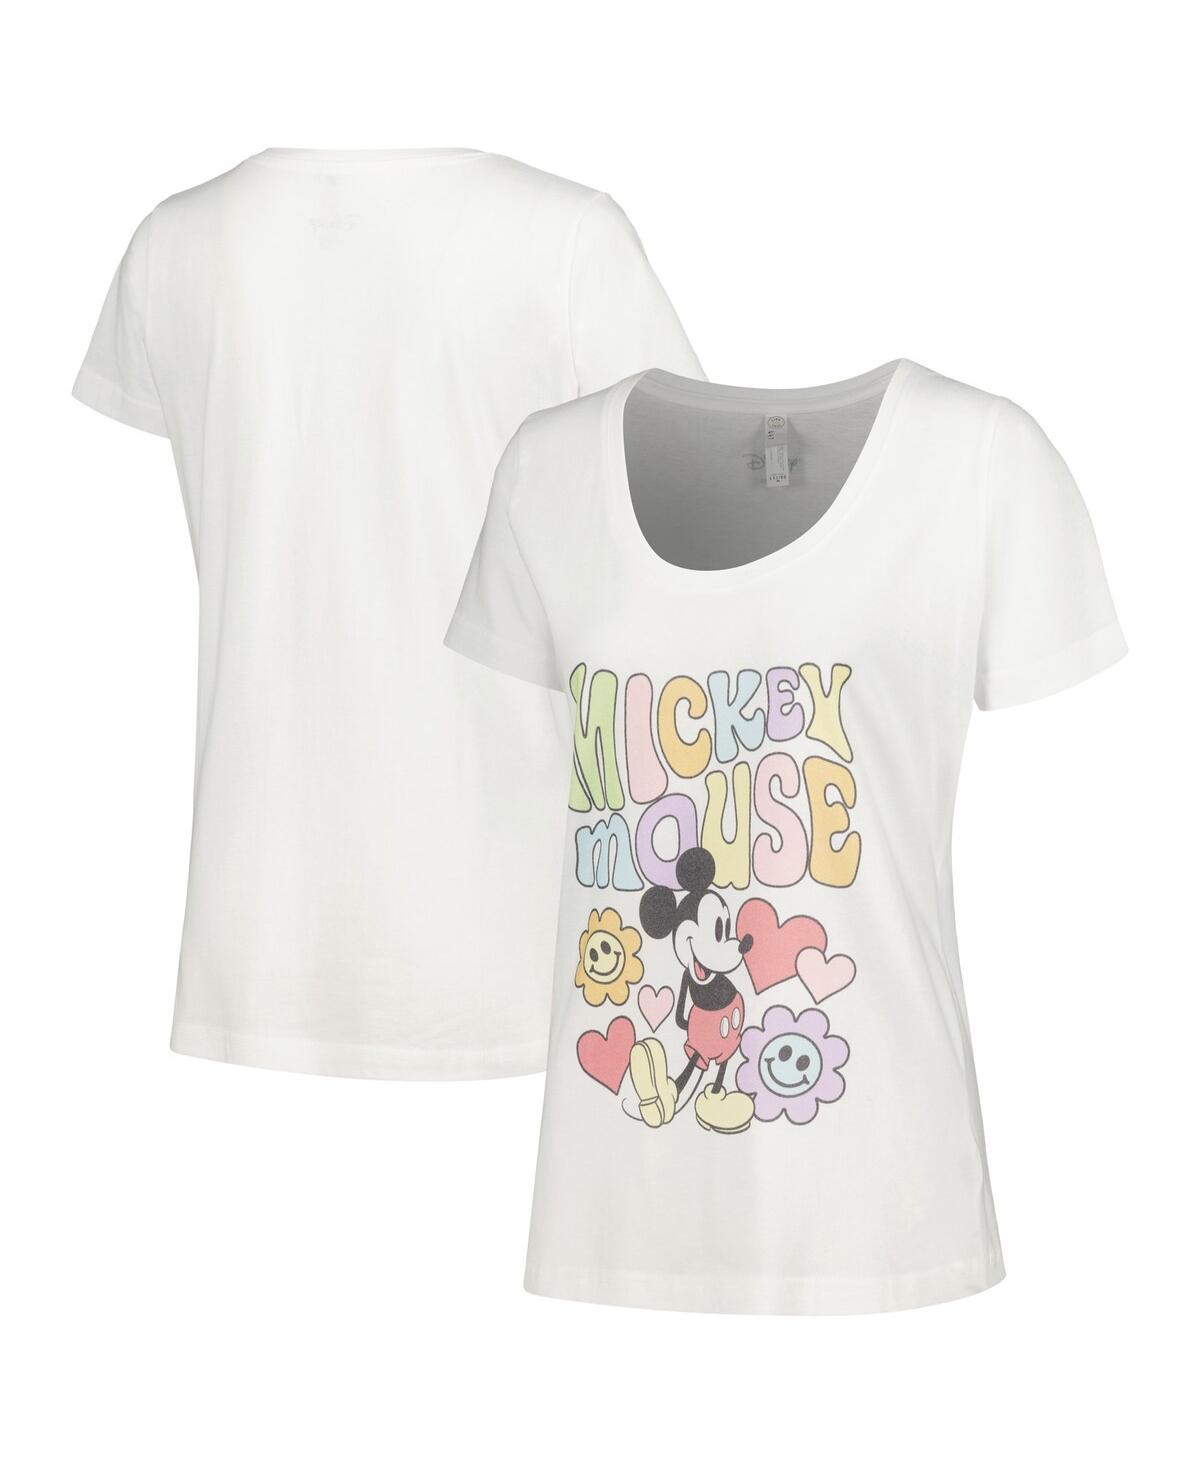 Women's Mickey Mouse White Mickey & Friends Groovy Scoop Neck T-shirt - White